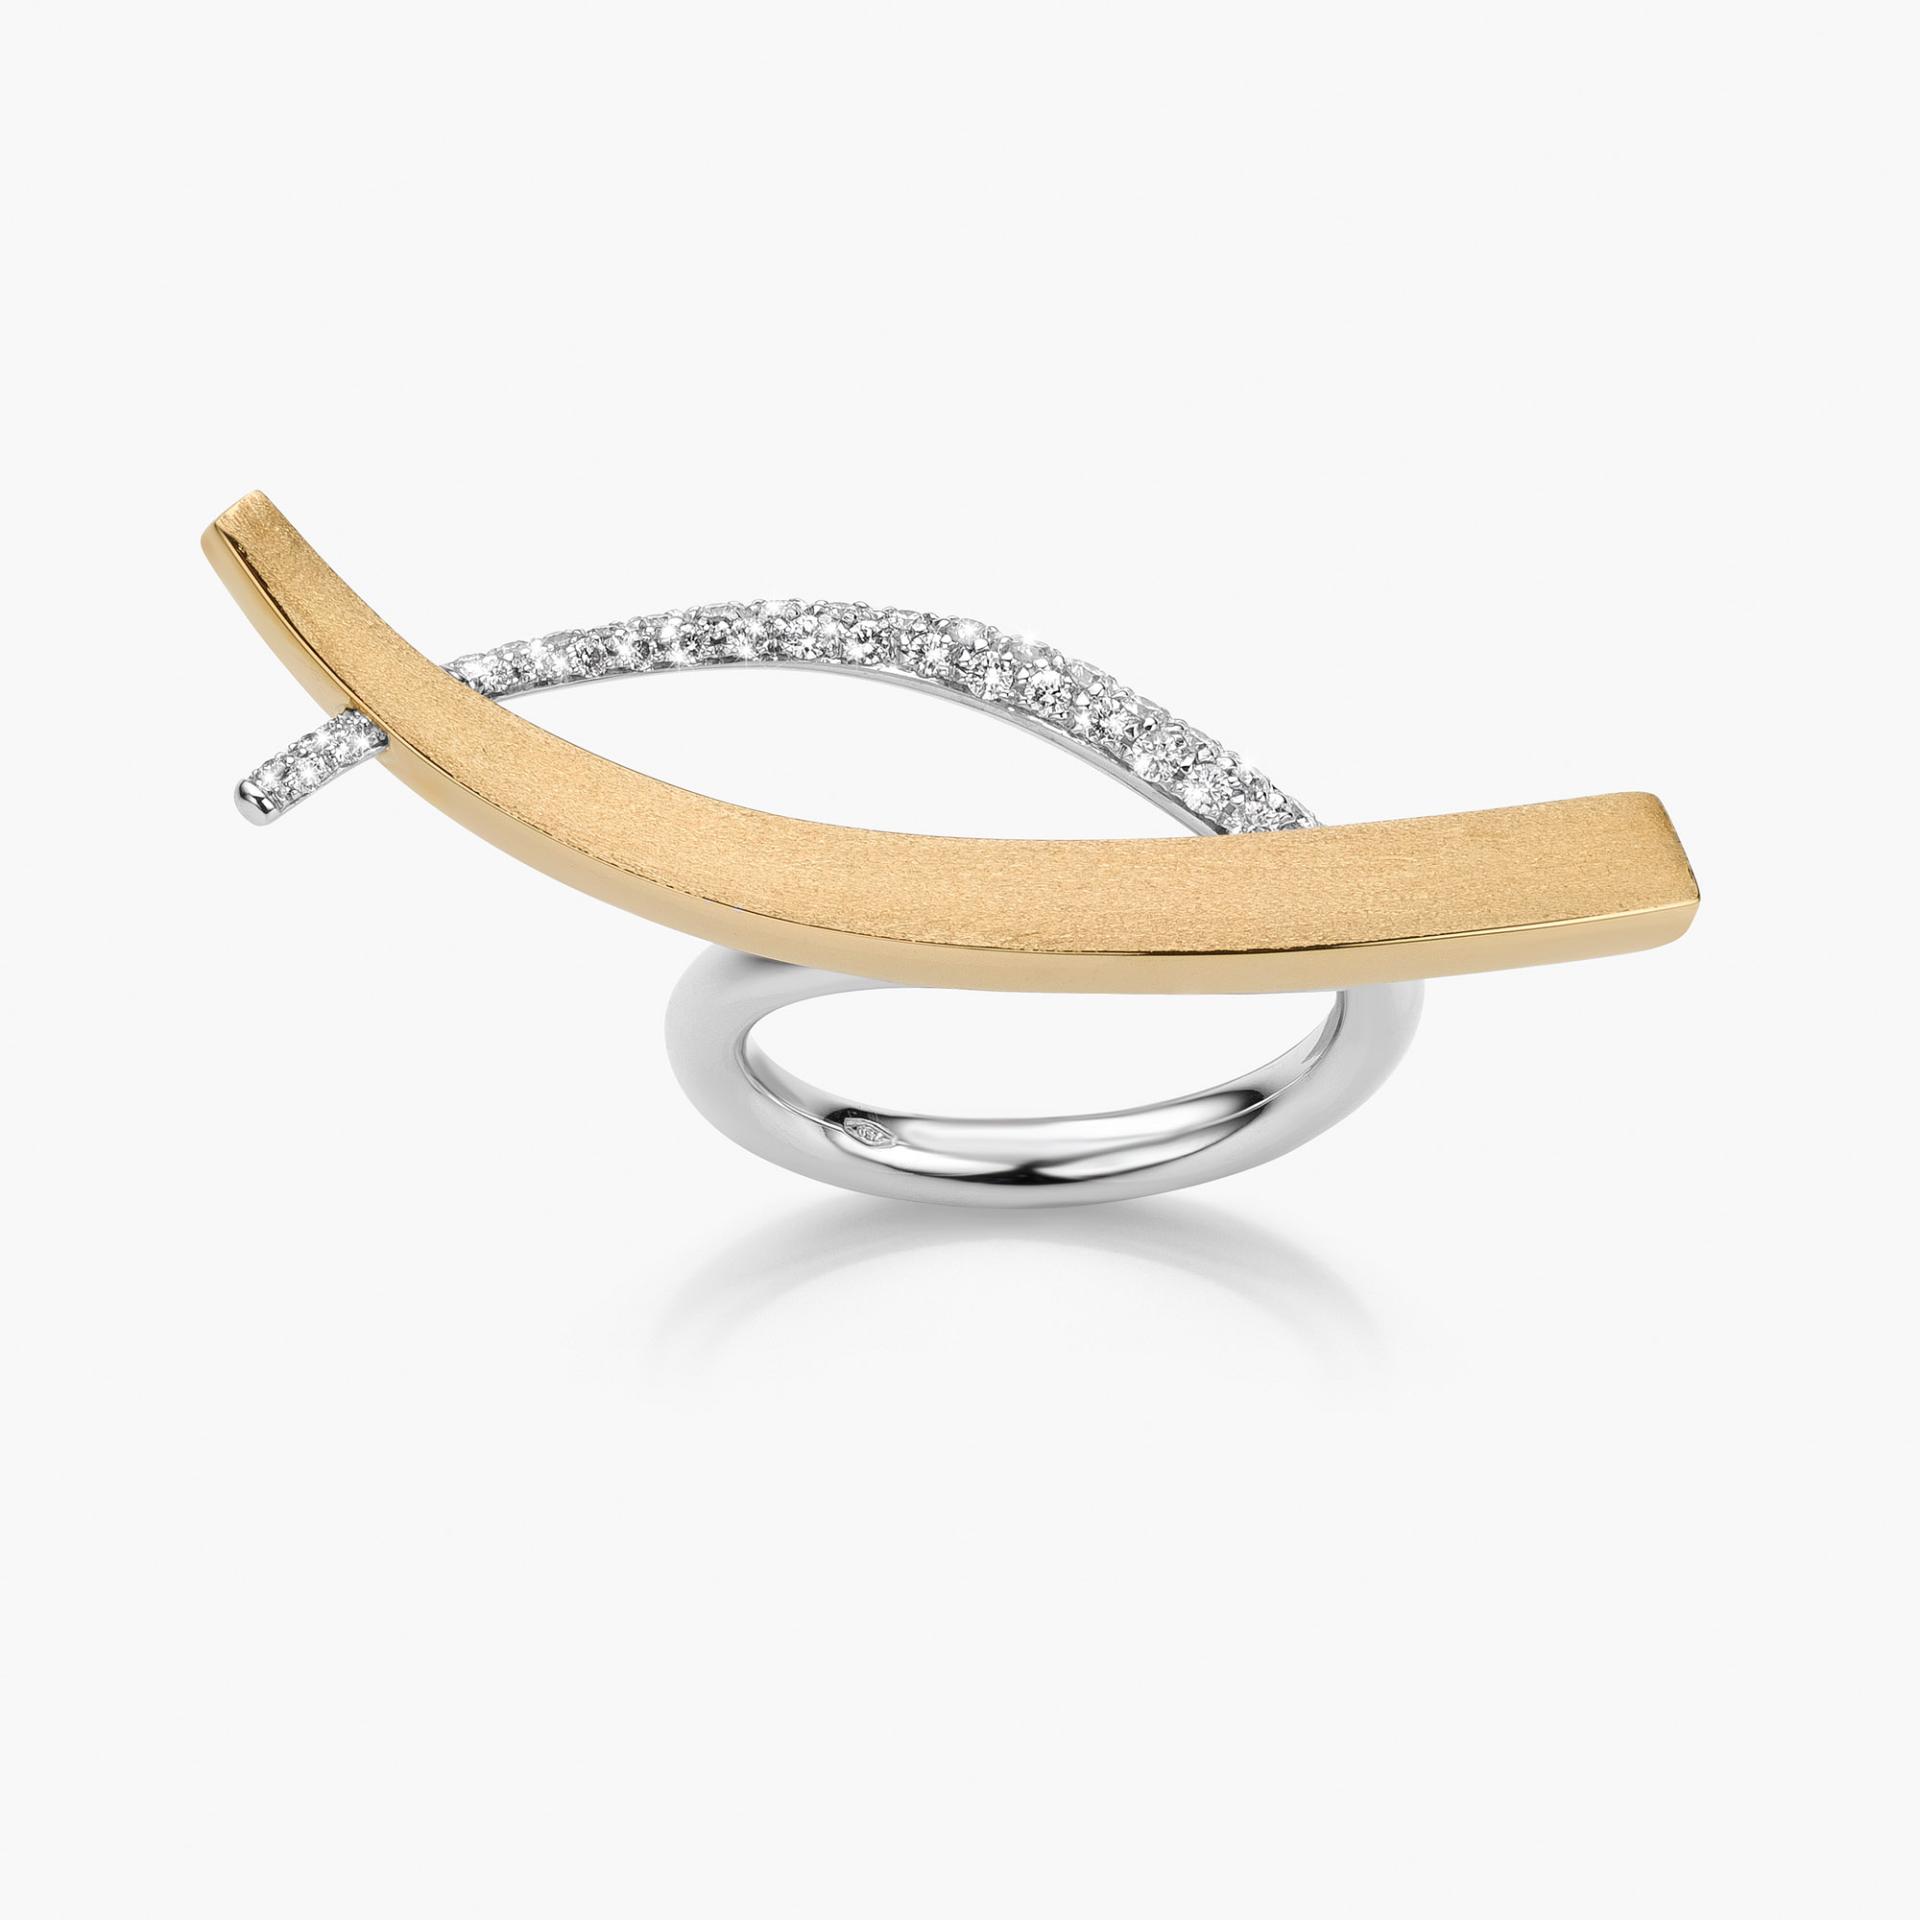 Brushed yellow and white gold ring set with brilliant cut diamonds made by Maison De Greef